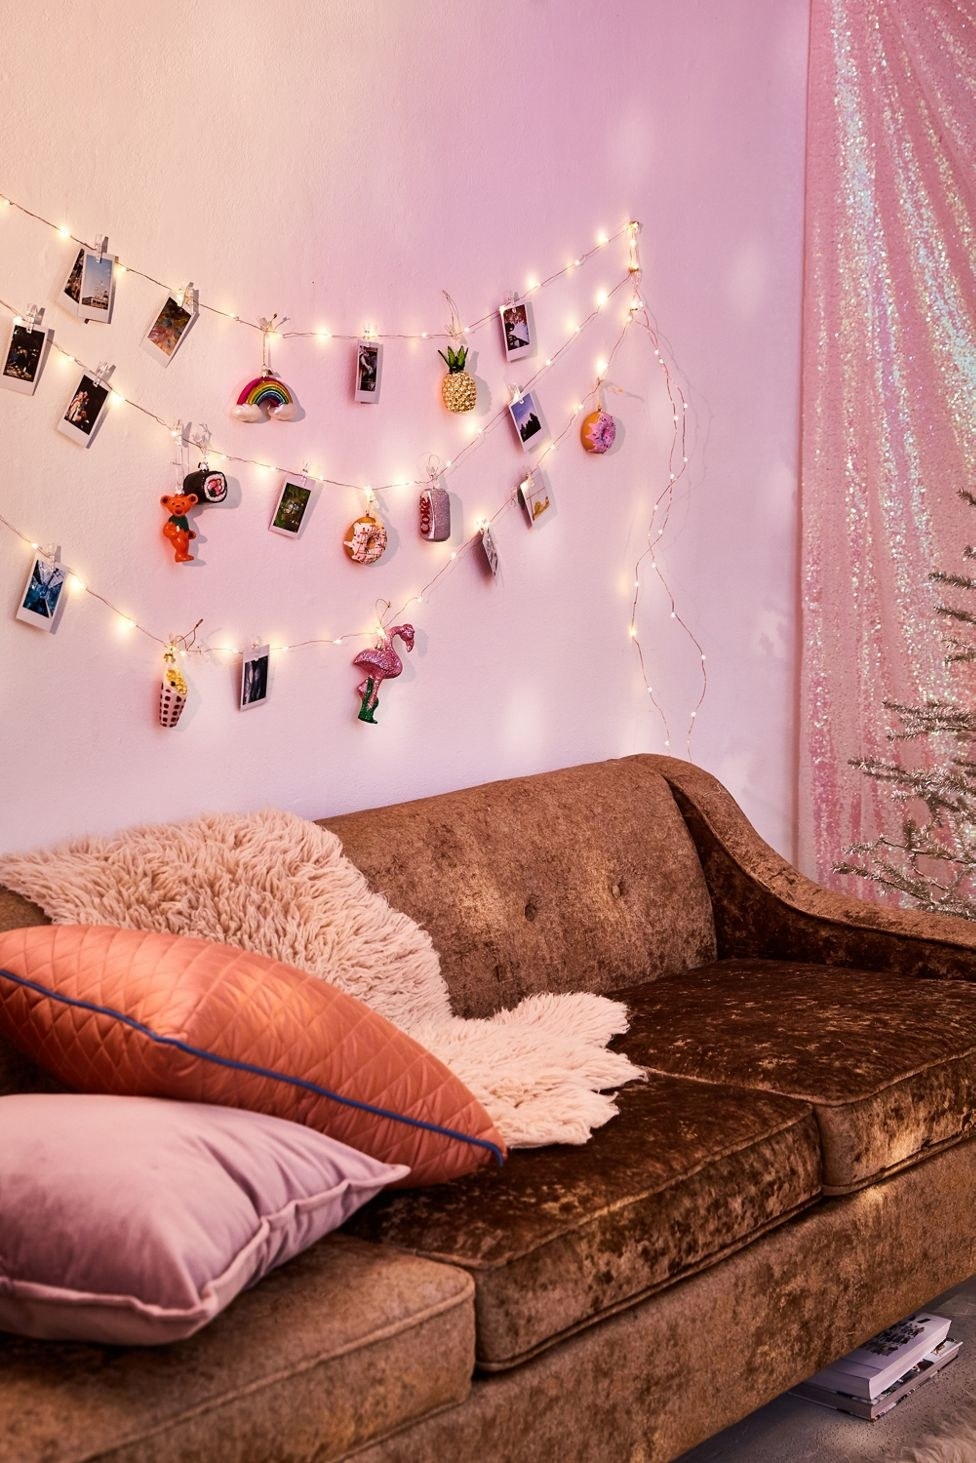 wall with stings of fairy lights and hanging instax photos